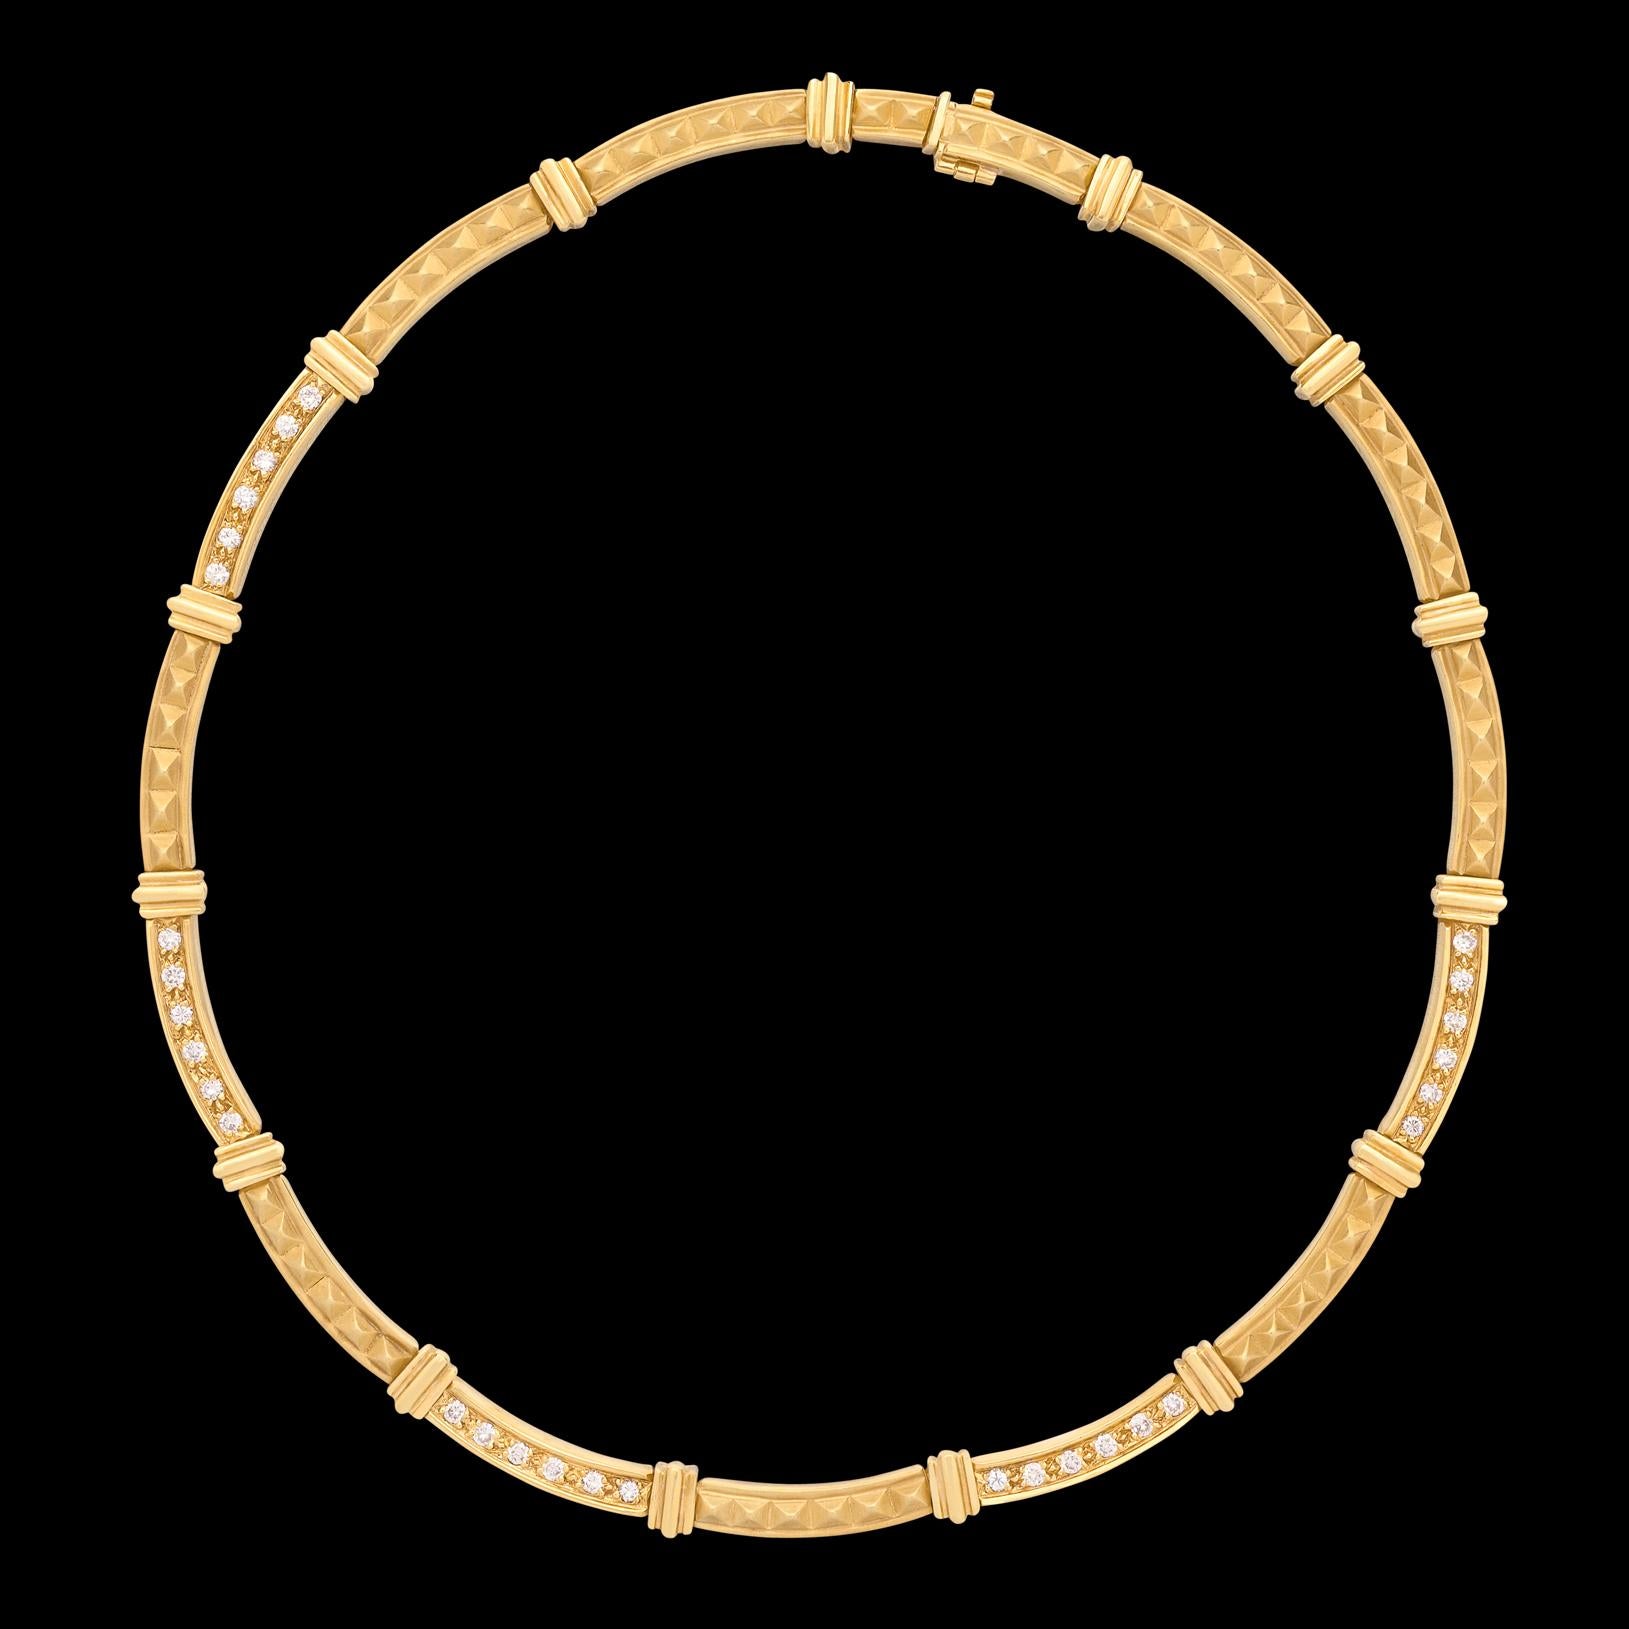 Modern design meets high fashion and wearability. This 18 karat gold Italian beauty features a modern textured design highlighting 30 fine white diamonds for 1.35 carats total weight (averaging G-H/VS). The choker necklace weighs 58 grams, measures